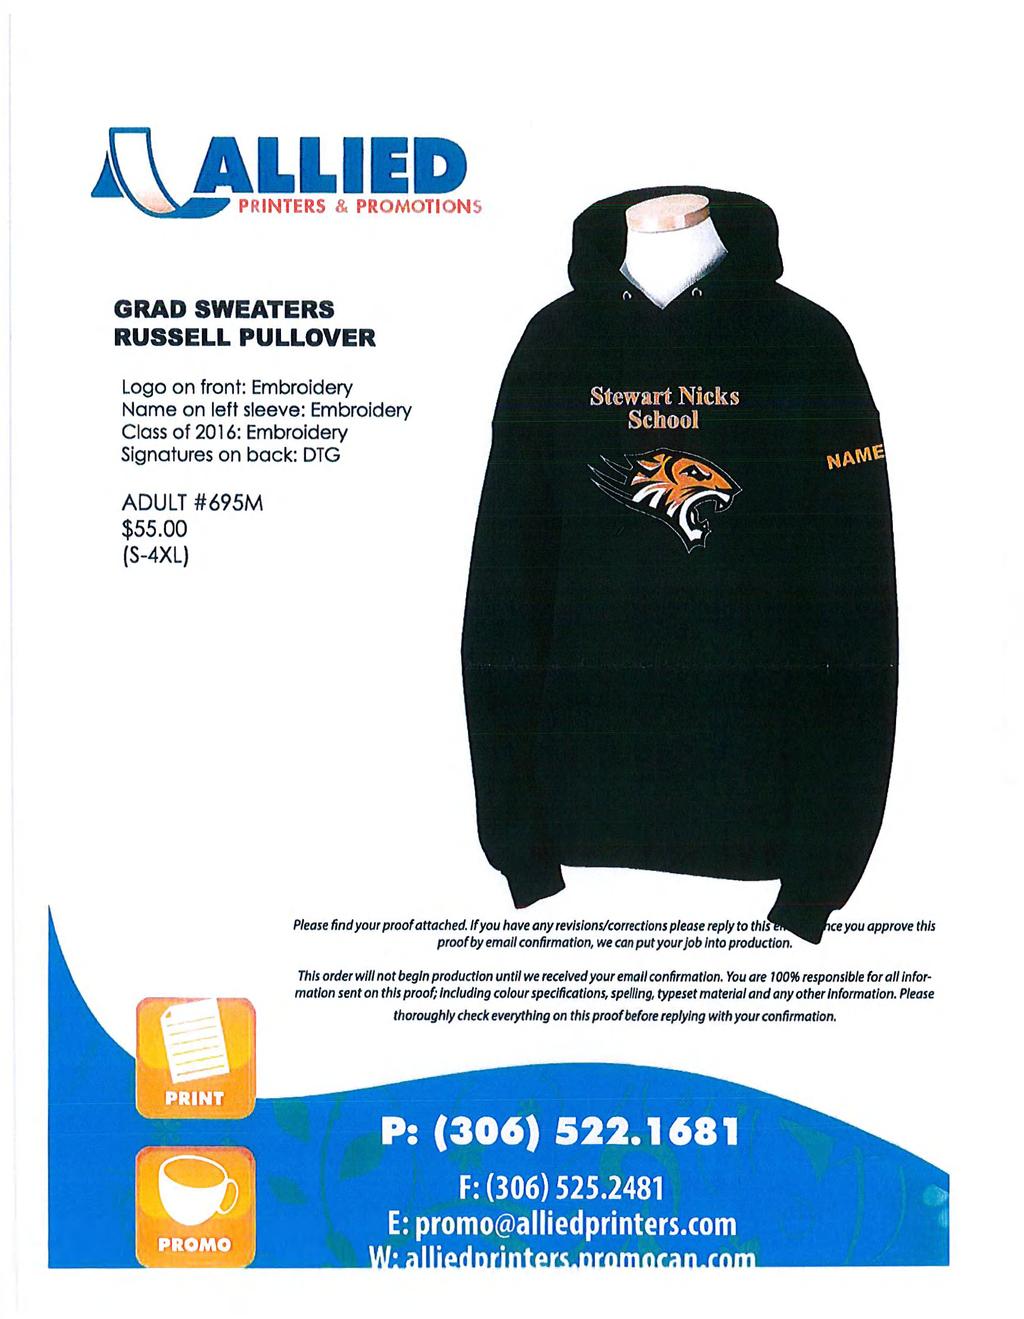 AVVMIIED \ J ^ PRINTERS & PROMOTIONS GRAD SWEATERS RUSSELL PULLOVER Logo on front: Embroidery Nome on left sleeve: Embroidery Class of 2016: Embroidery Signatures on back: DTG ADULT #695M